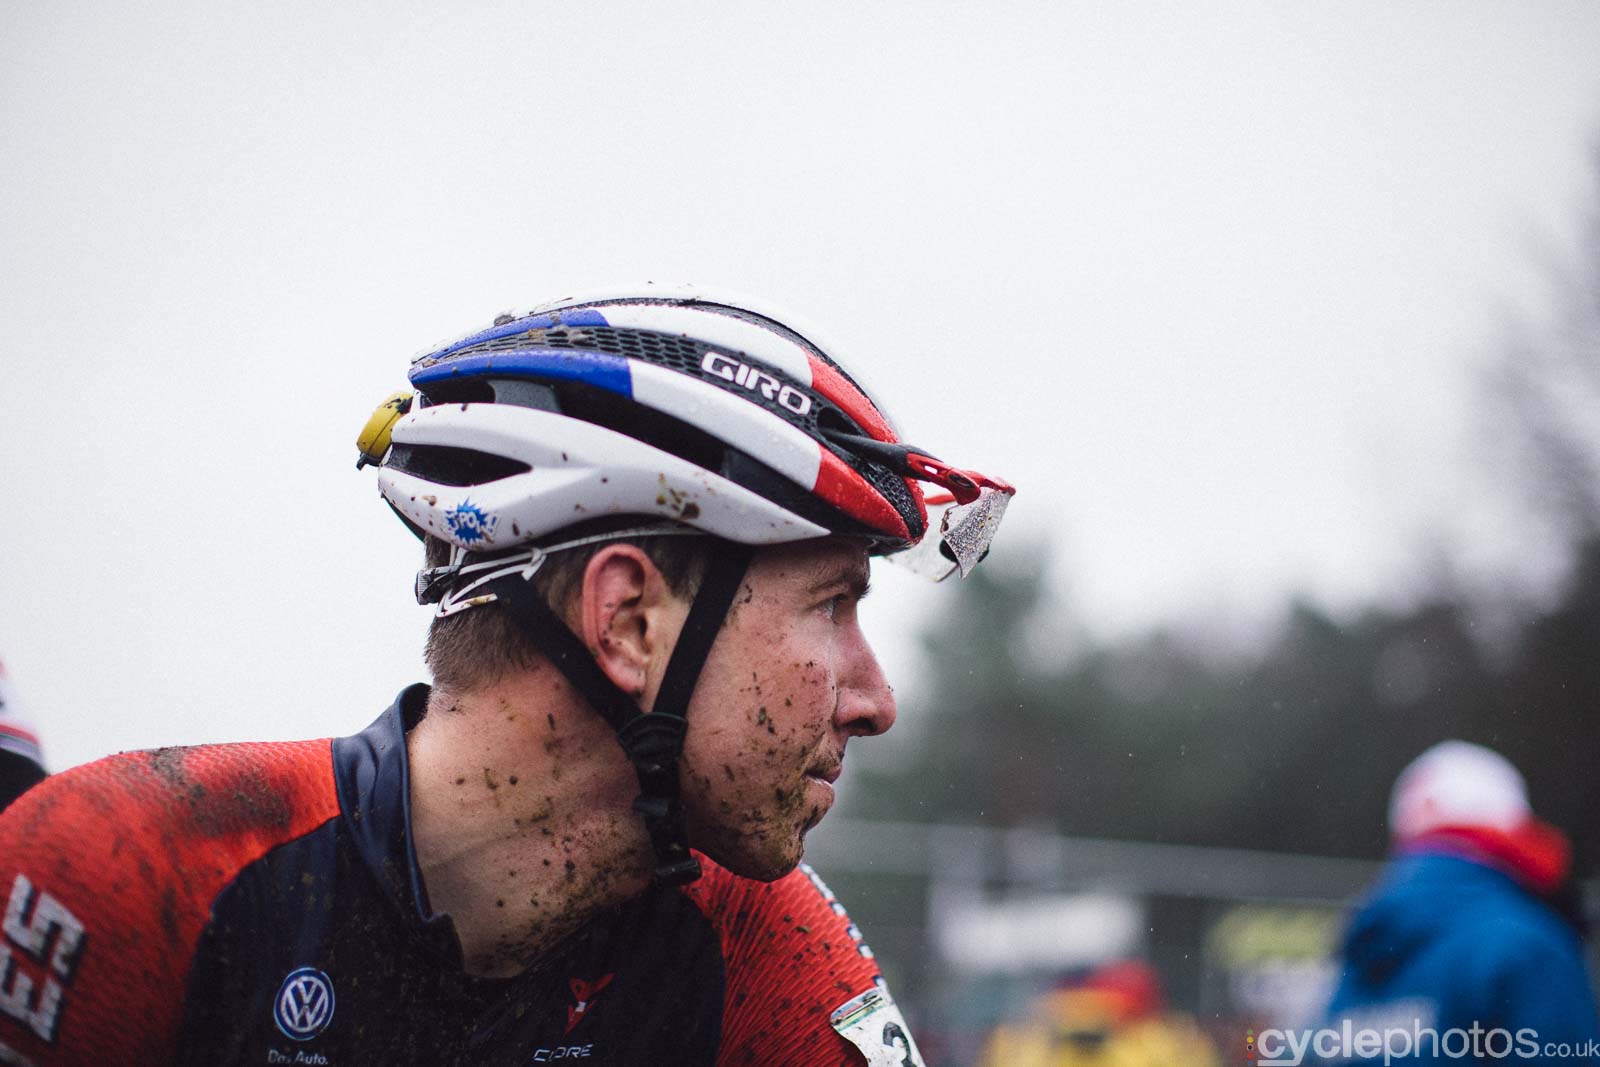 2016-cyclephotos-cyclocross-world-championships-zolder-161202-jeremy-powers